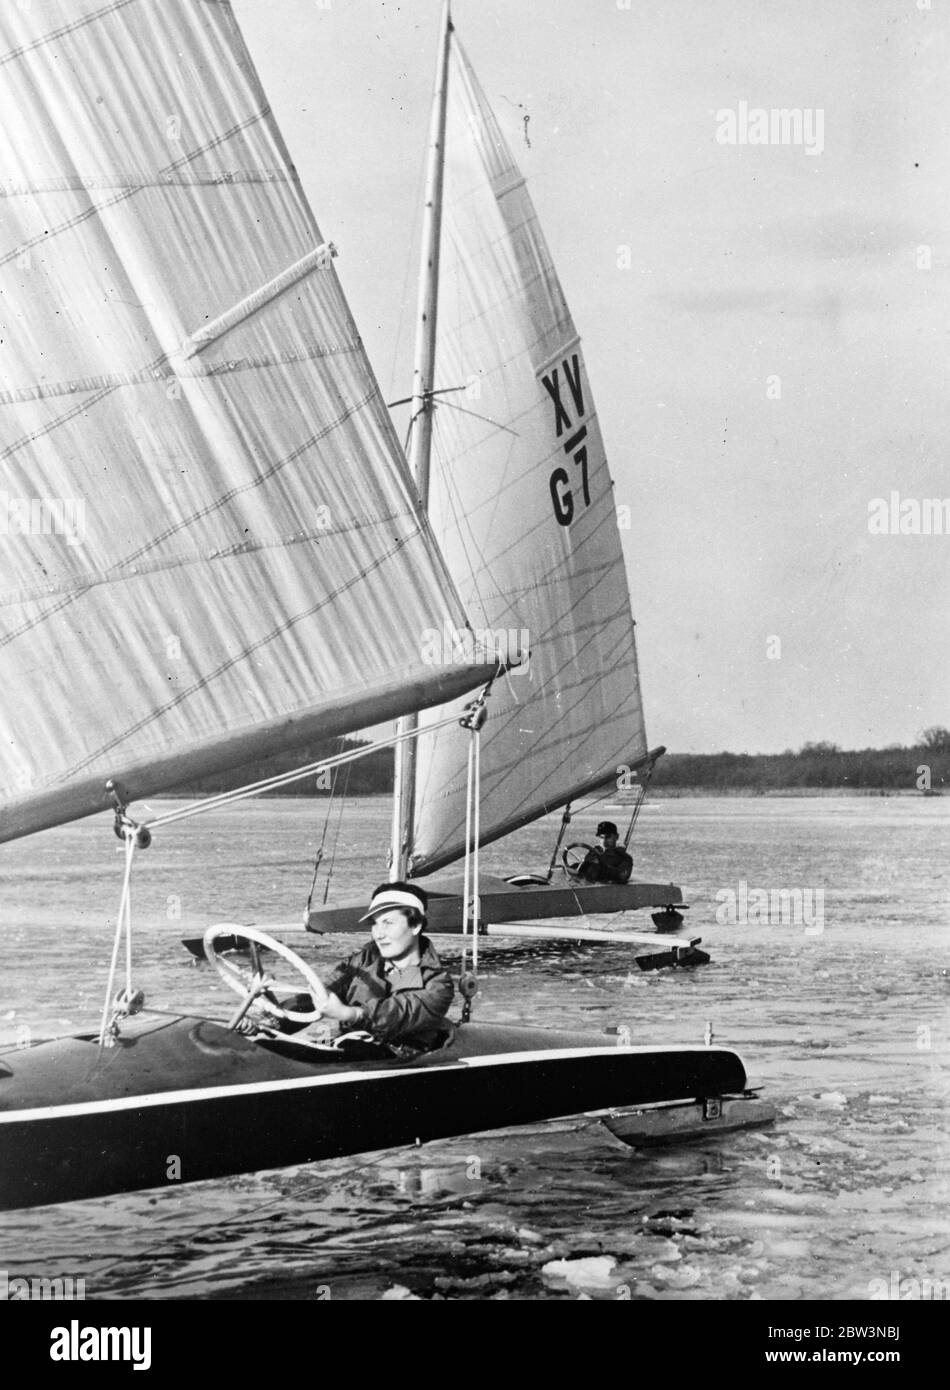 Ice yachting refatta in wintry Germany . The cold is so intense in Germany that ice yacgting enthusiasts from Berlin held a regatta on the frozen Bangadorfer See . Photo shows , Ice yachts skimming over the frozen Bangadorfer See . 31 December 1935 Stock Photo